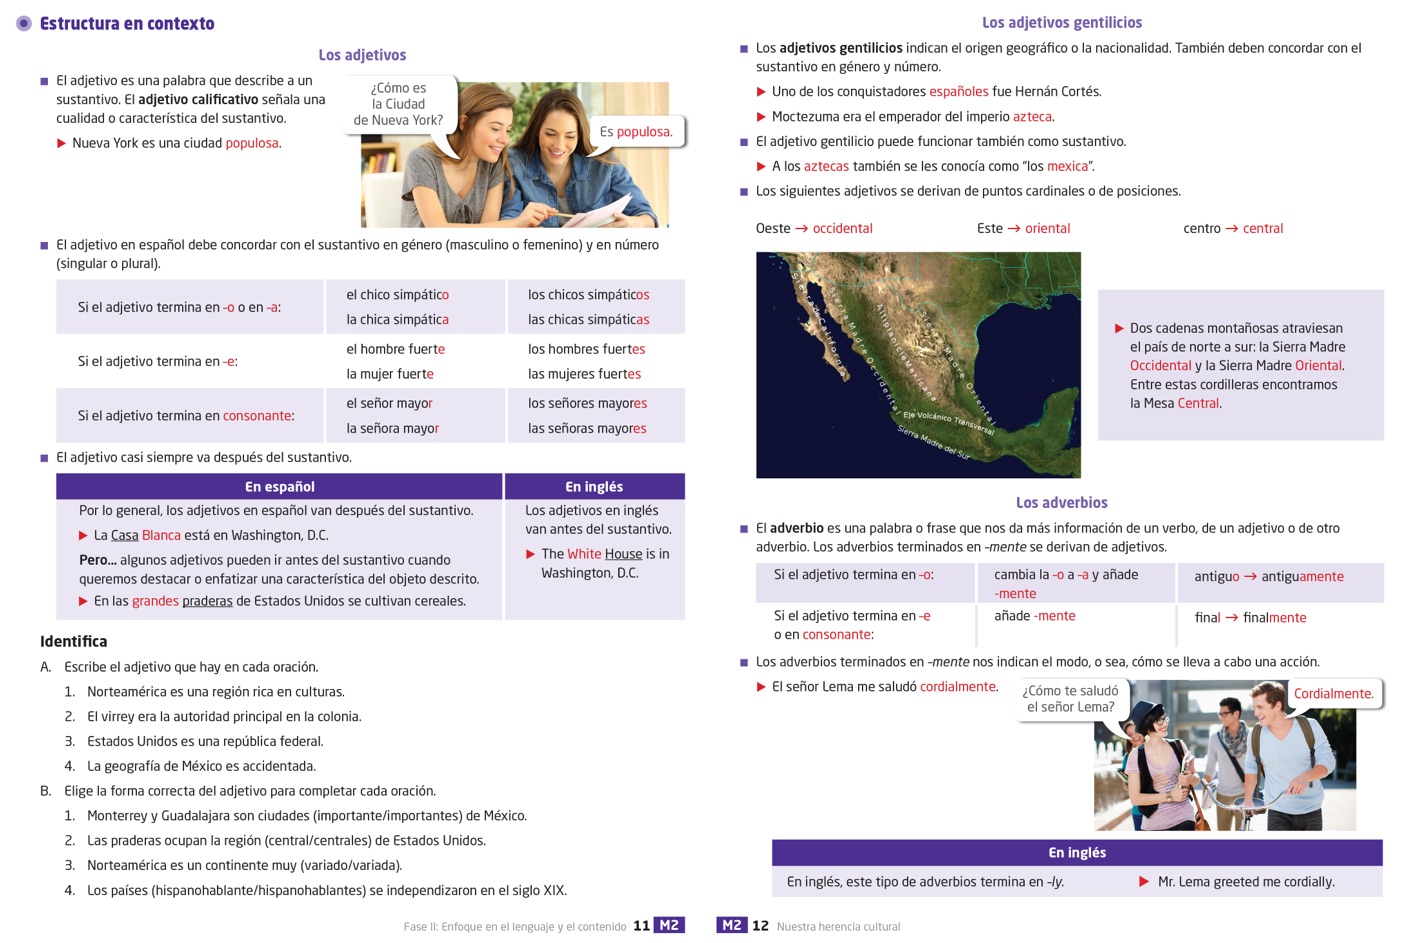 Textbook pages showing grammar concepts, connections to the English language, and practice activities.